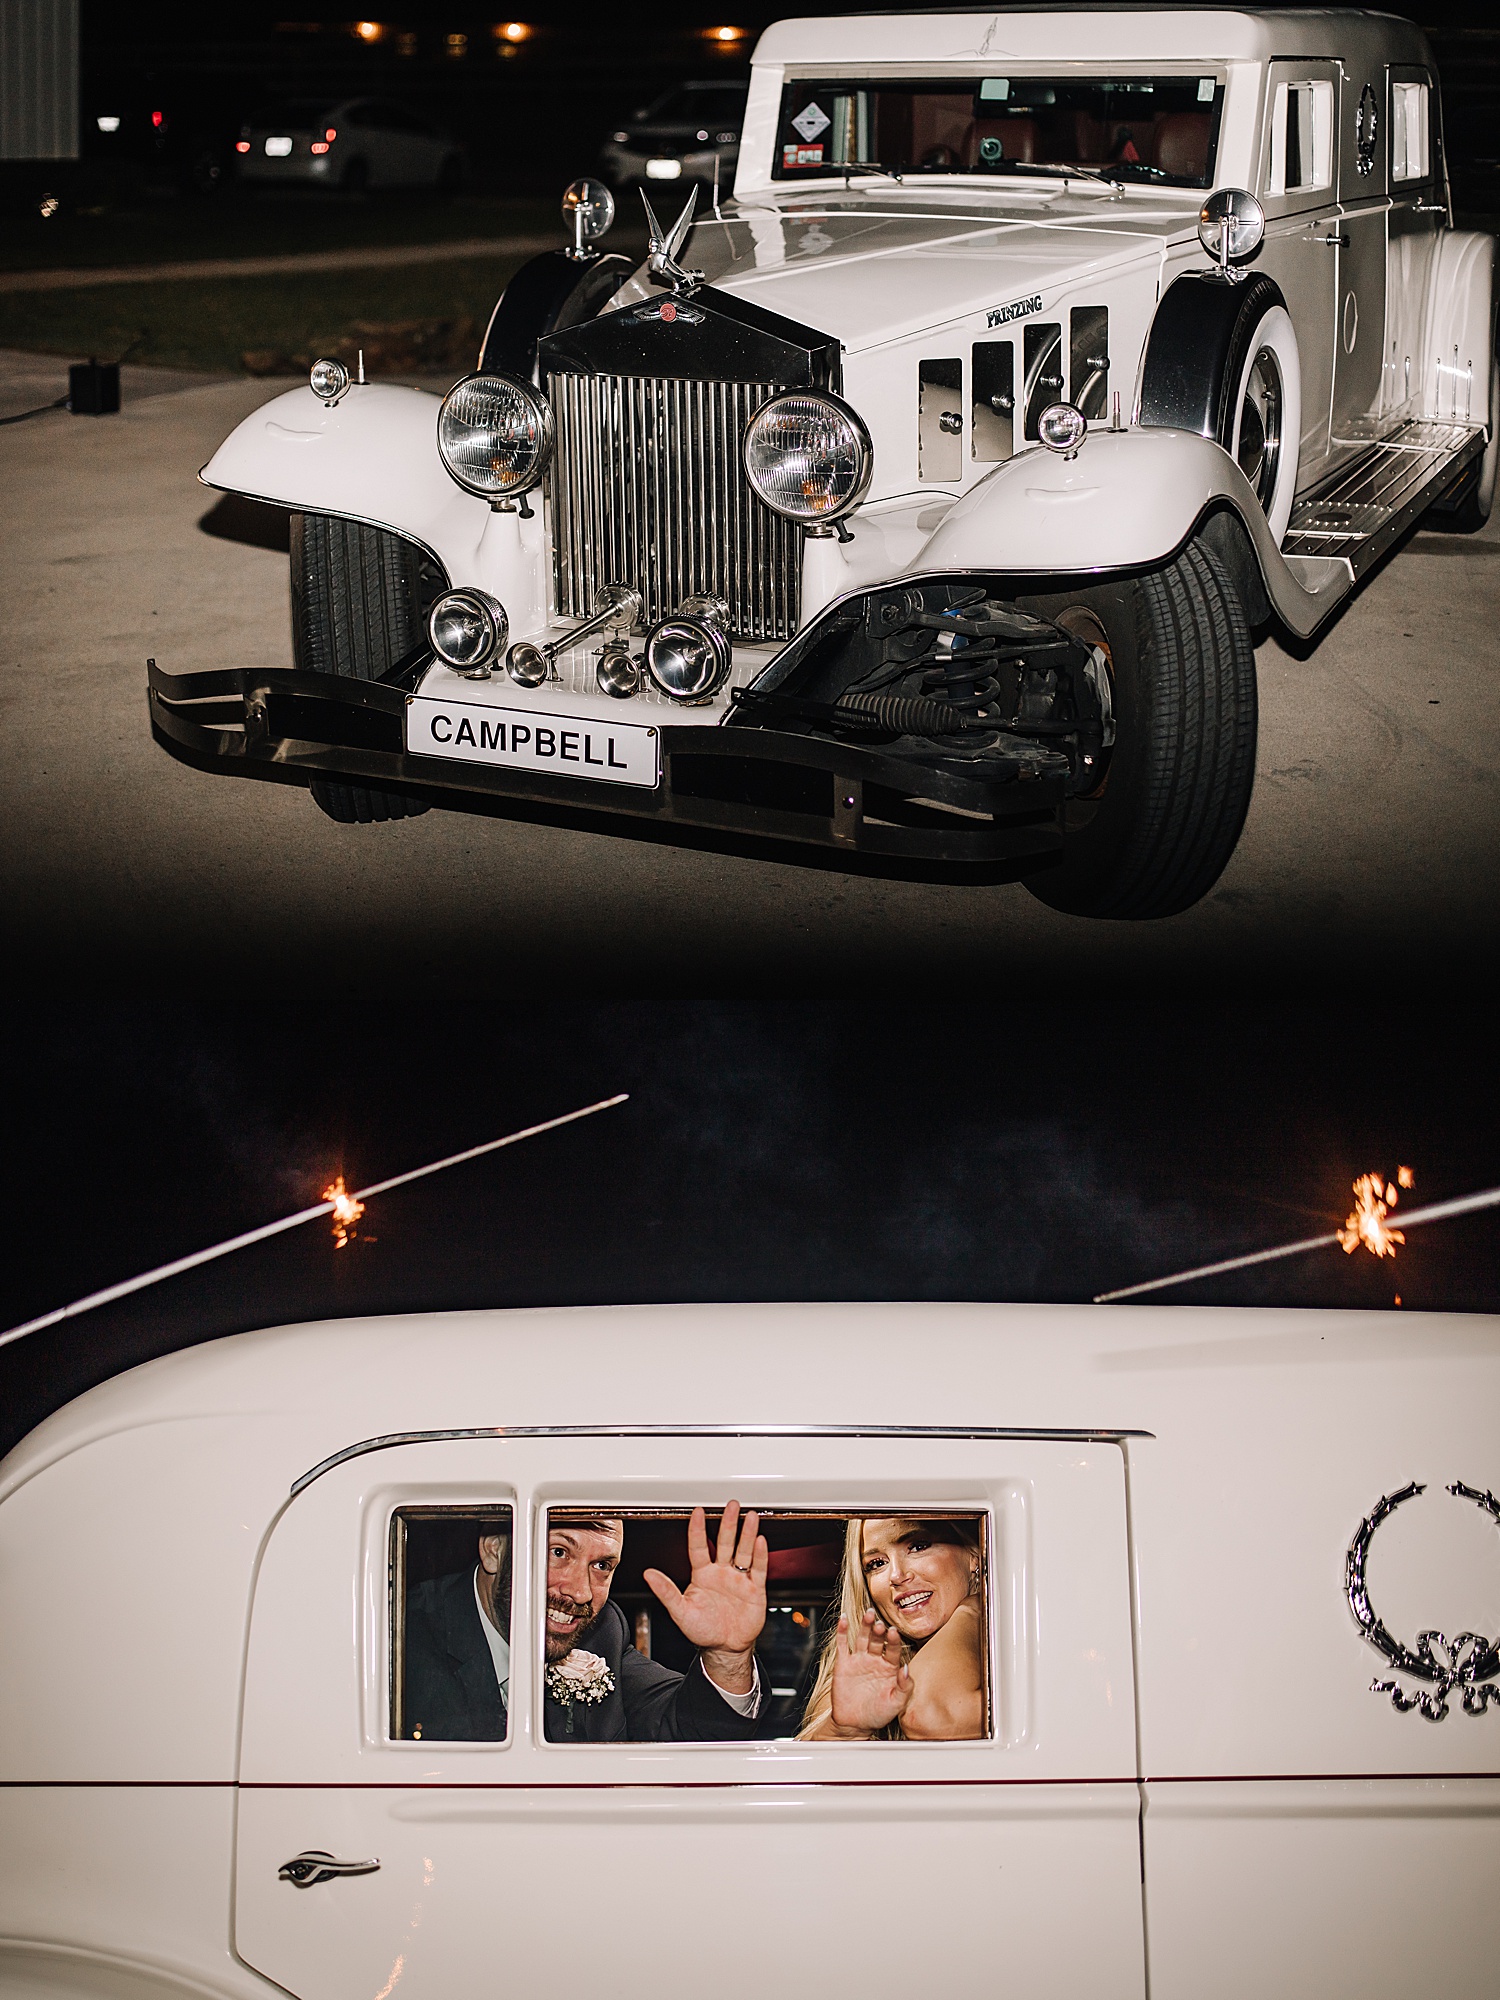 Bride and groom ride off in getaway car together at the end of wedding reception 